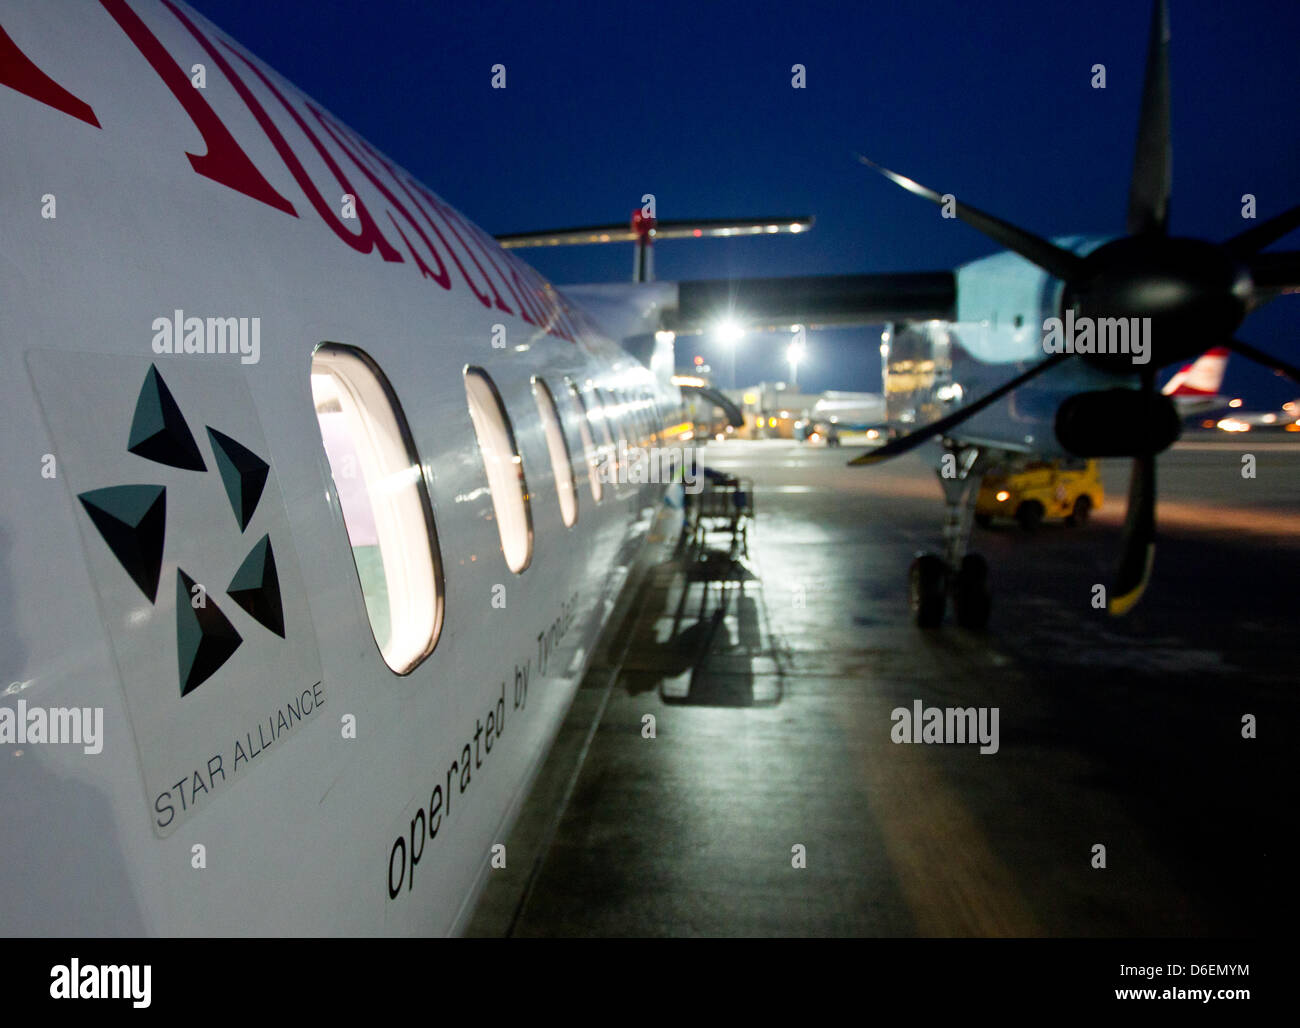 An aircraft of the airline 'Austrian', memeber of 'Star Alliance' stands on the airport in Vienna, Austria, 31 January 2012. Photo: Jens Wolf Stock Photo